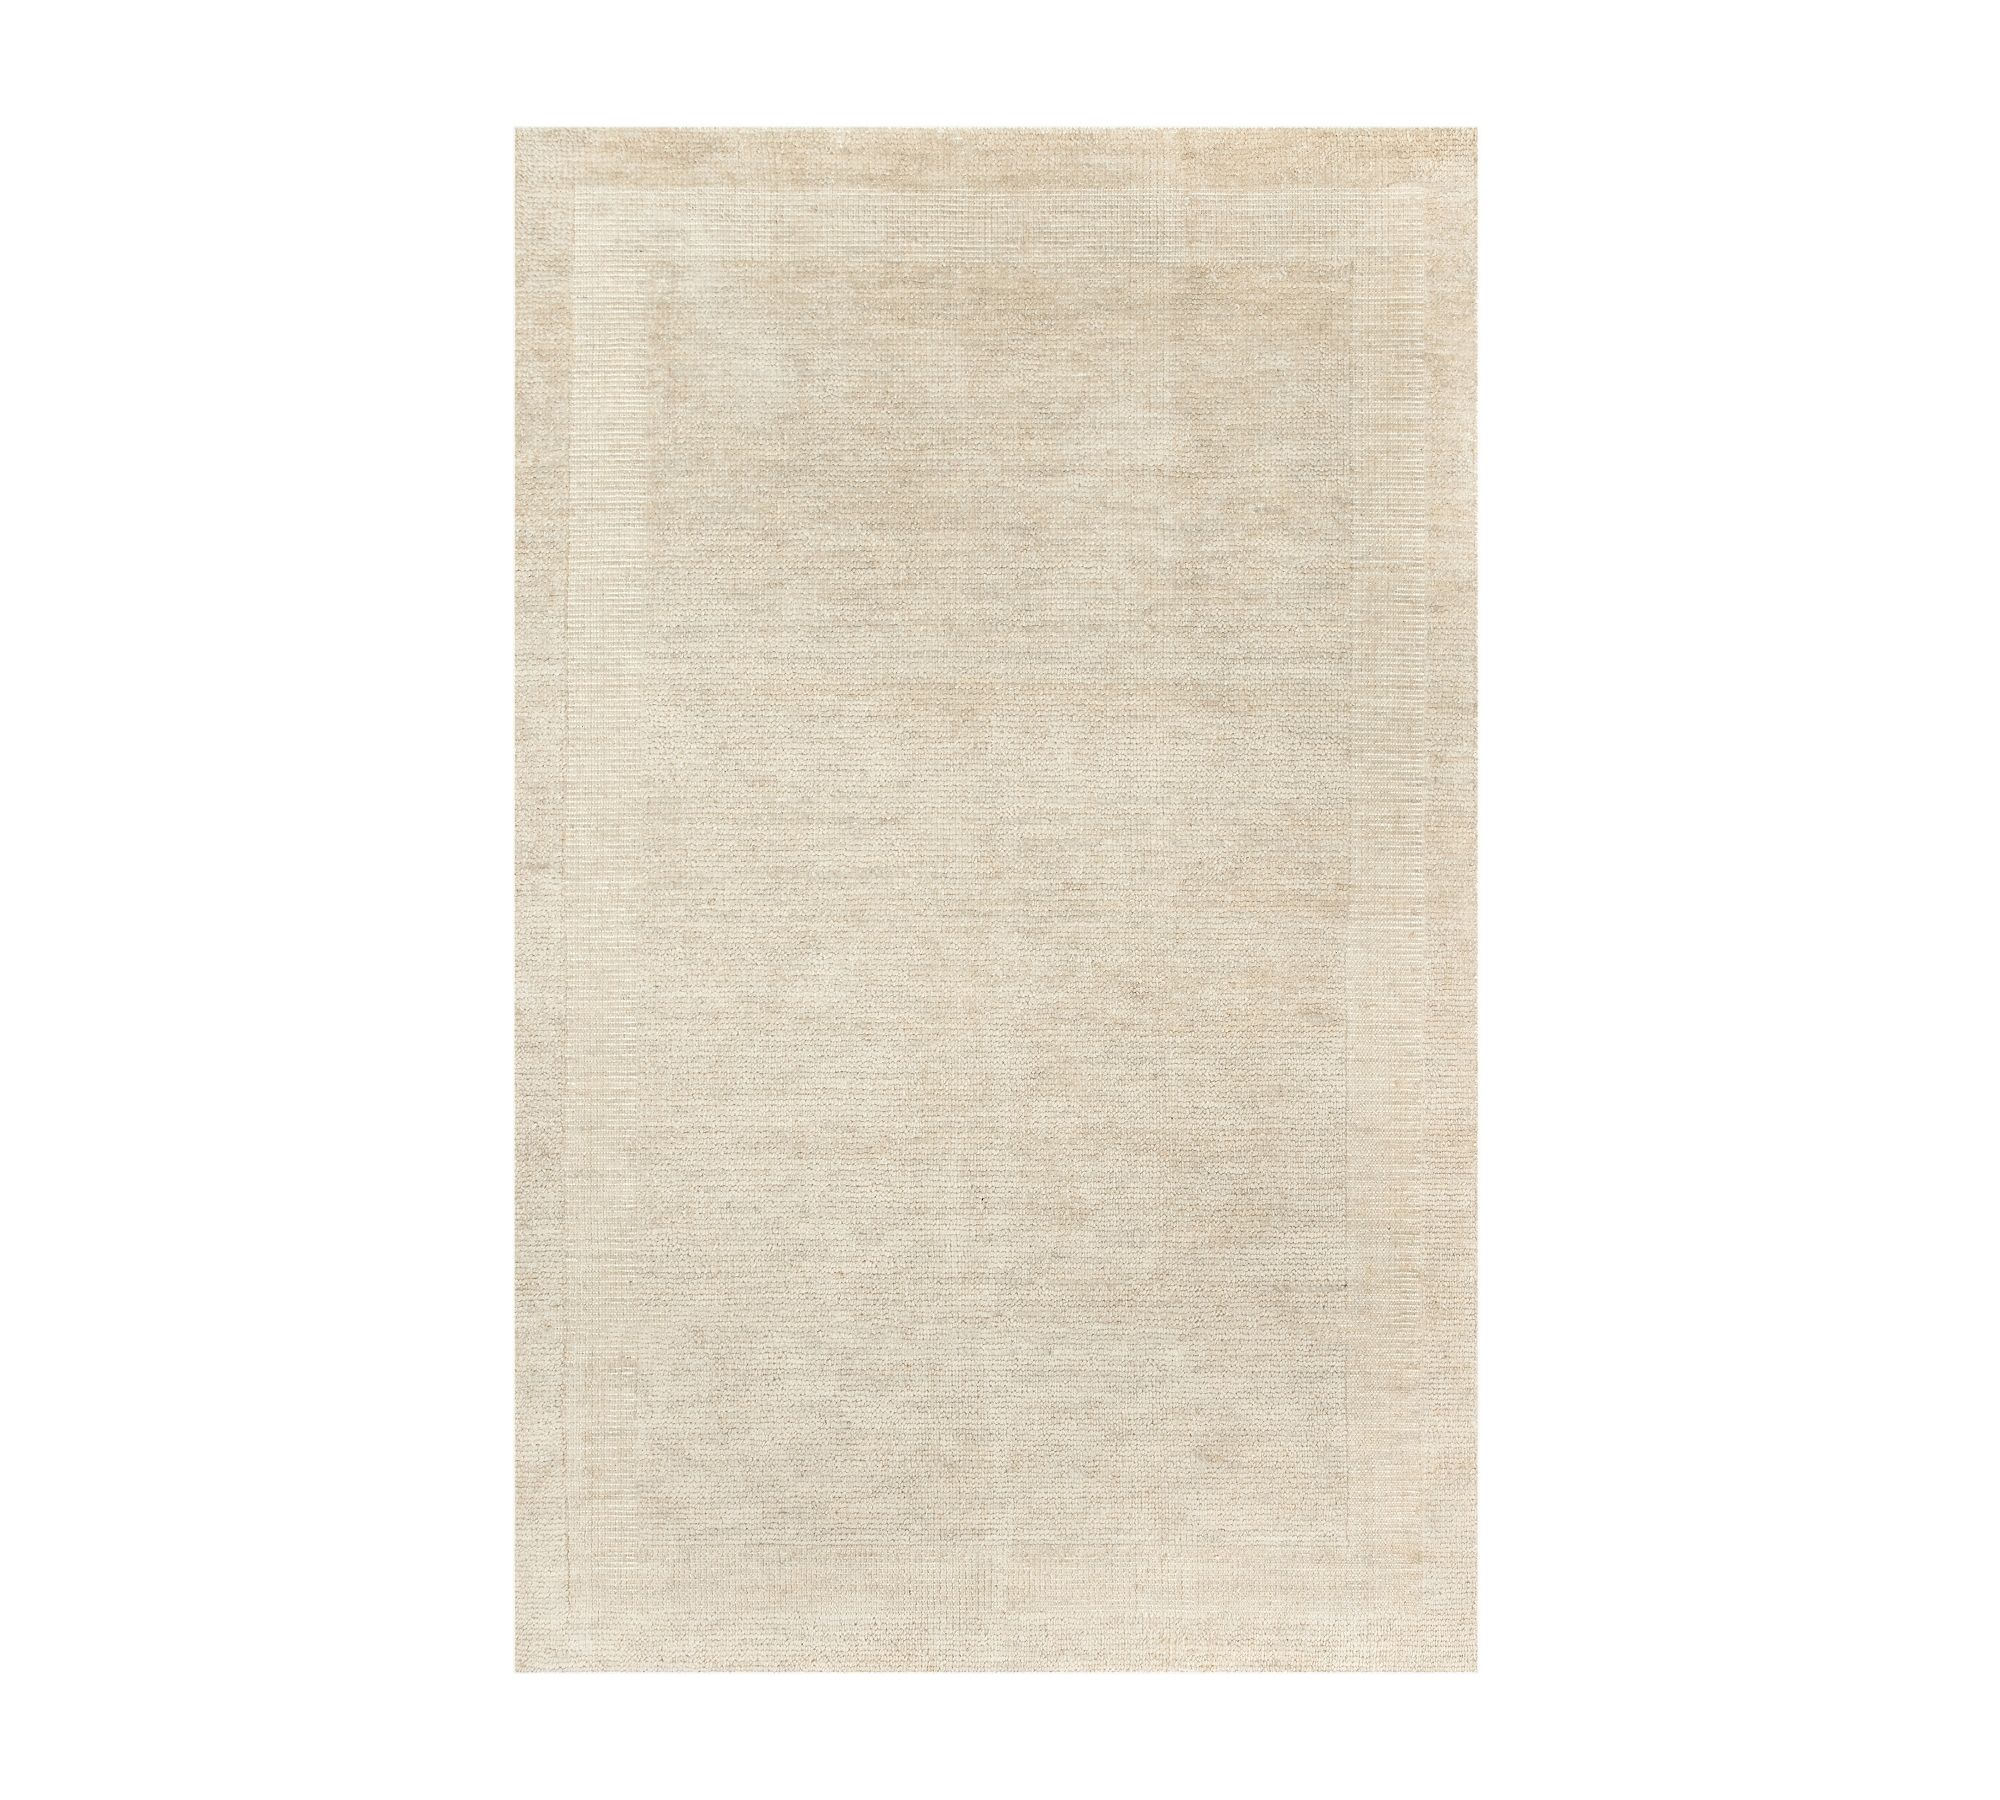 Connor Performance Wool Rug